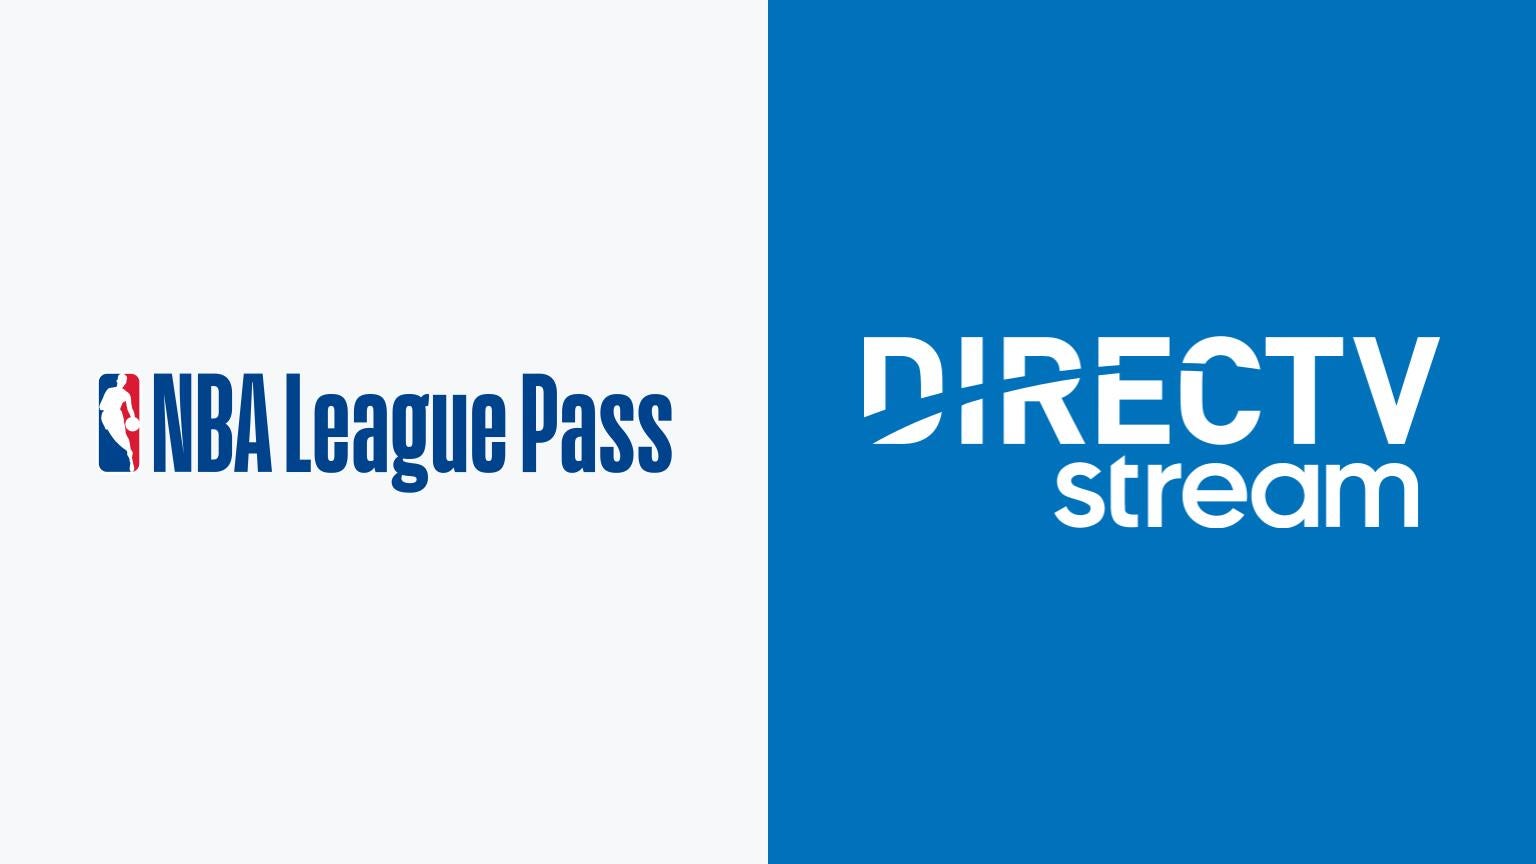 DIRECTV STREAM Offering Free Preview of NBA League Pass Through October 26 